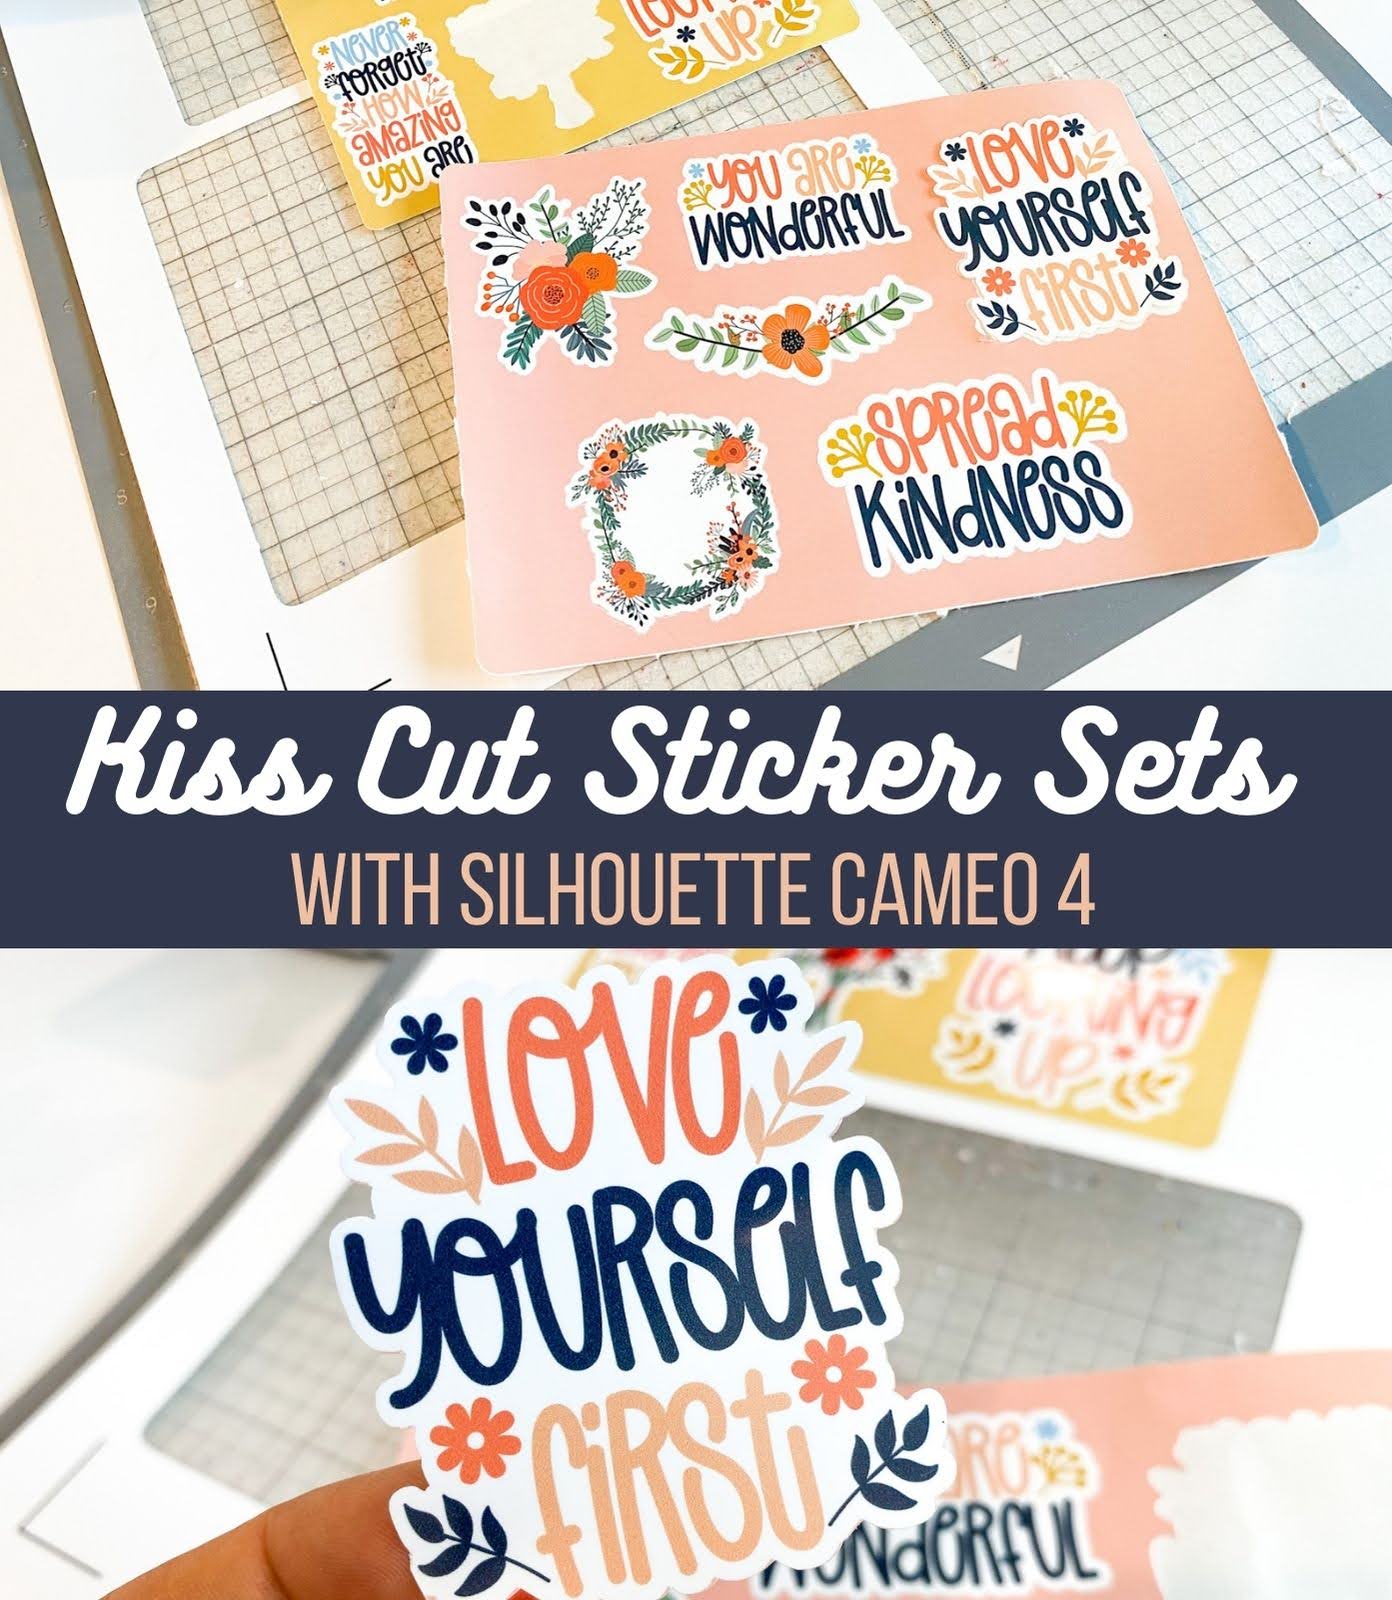 How to Make Sticker Sheets with Cricut - Kiss Cut Stickers 